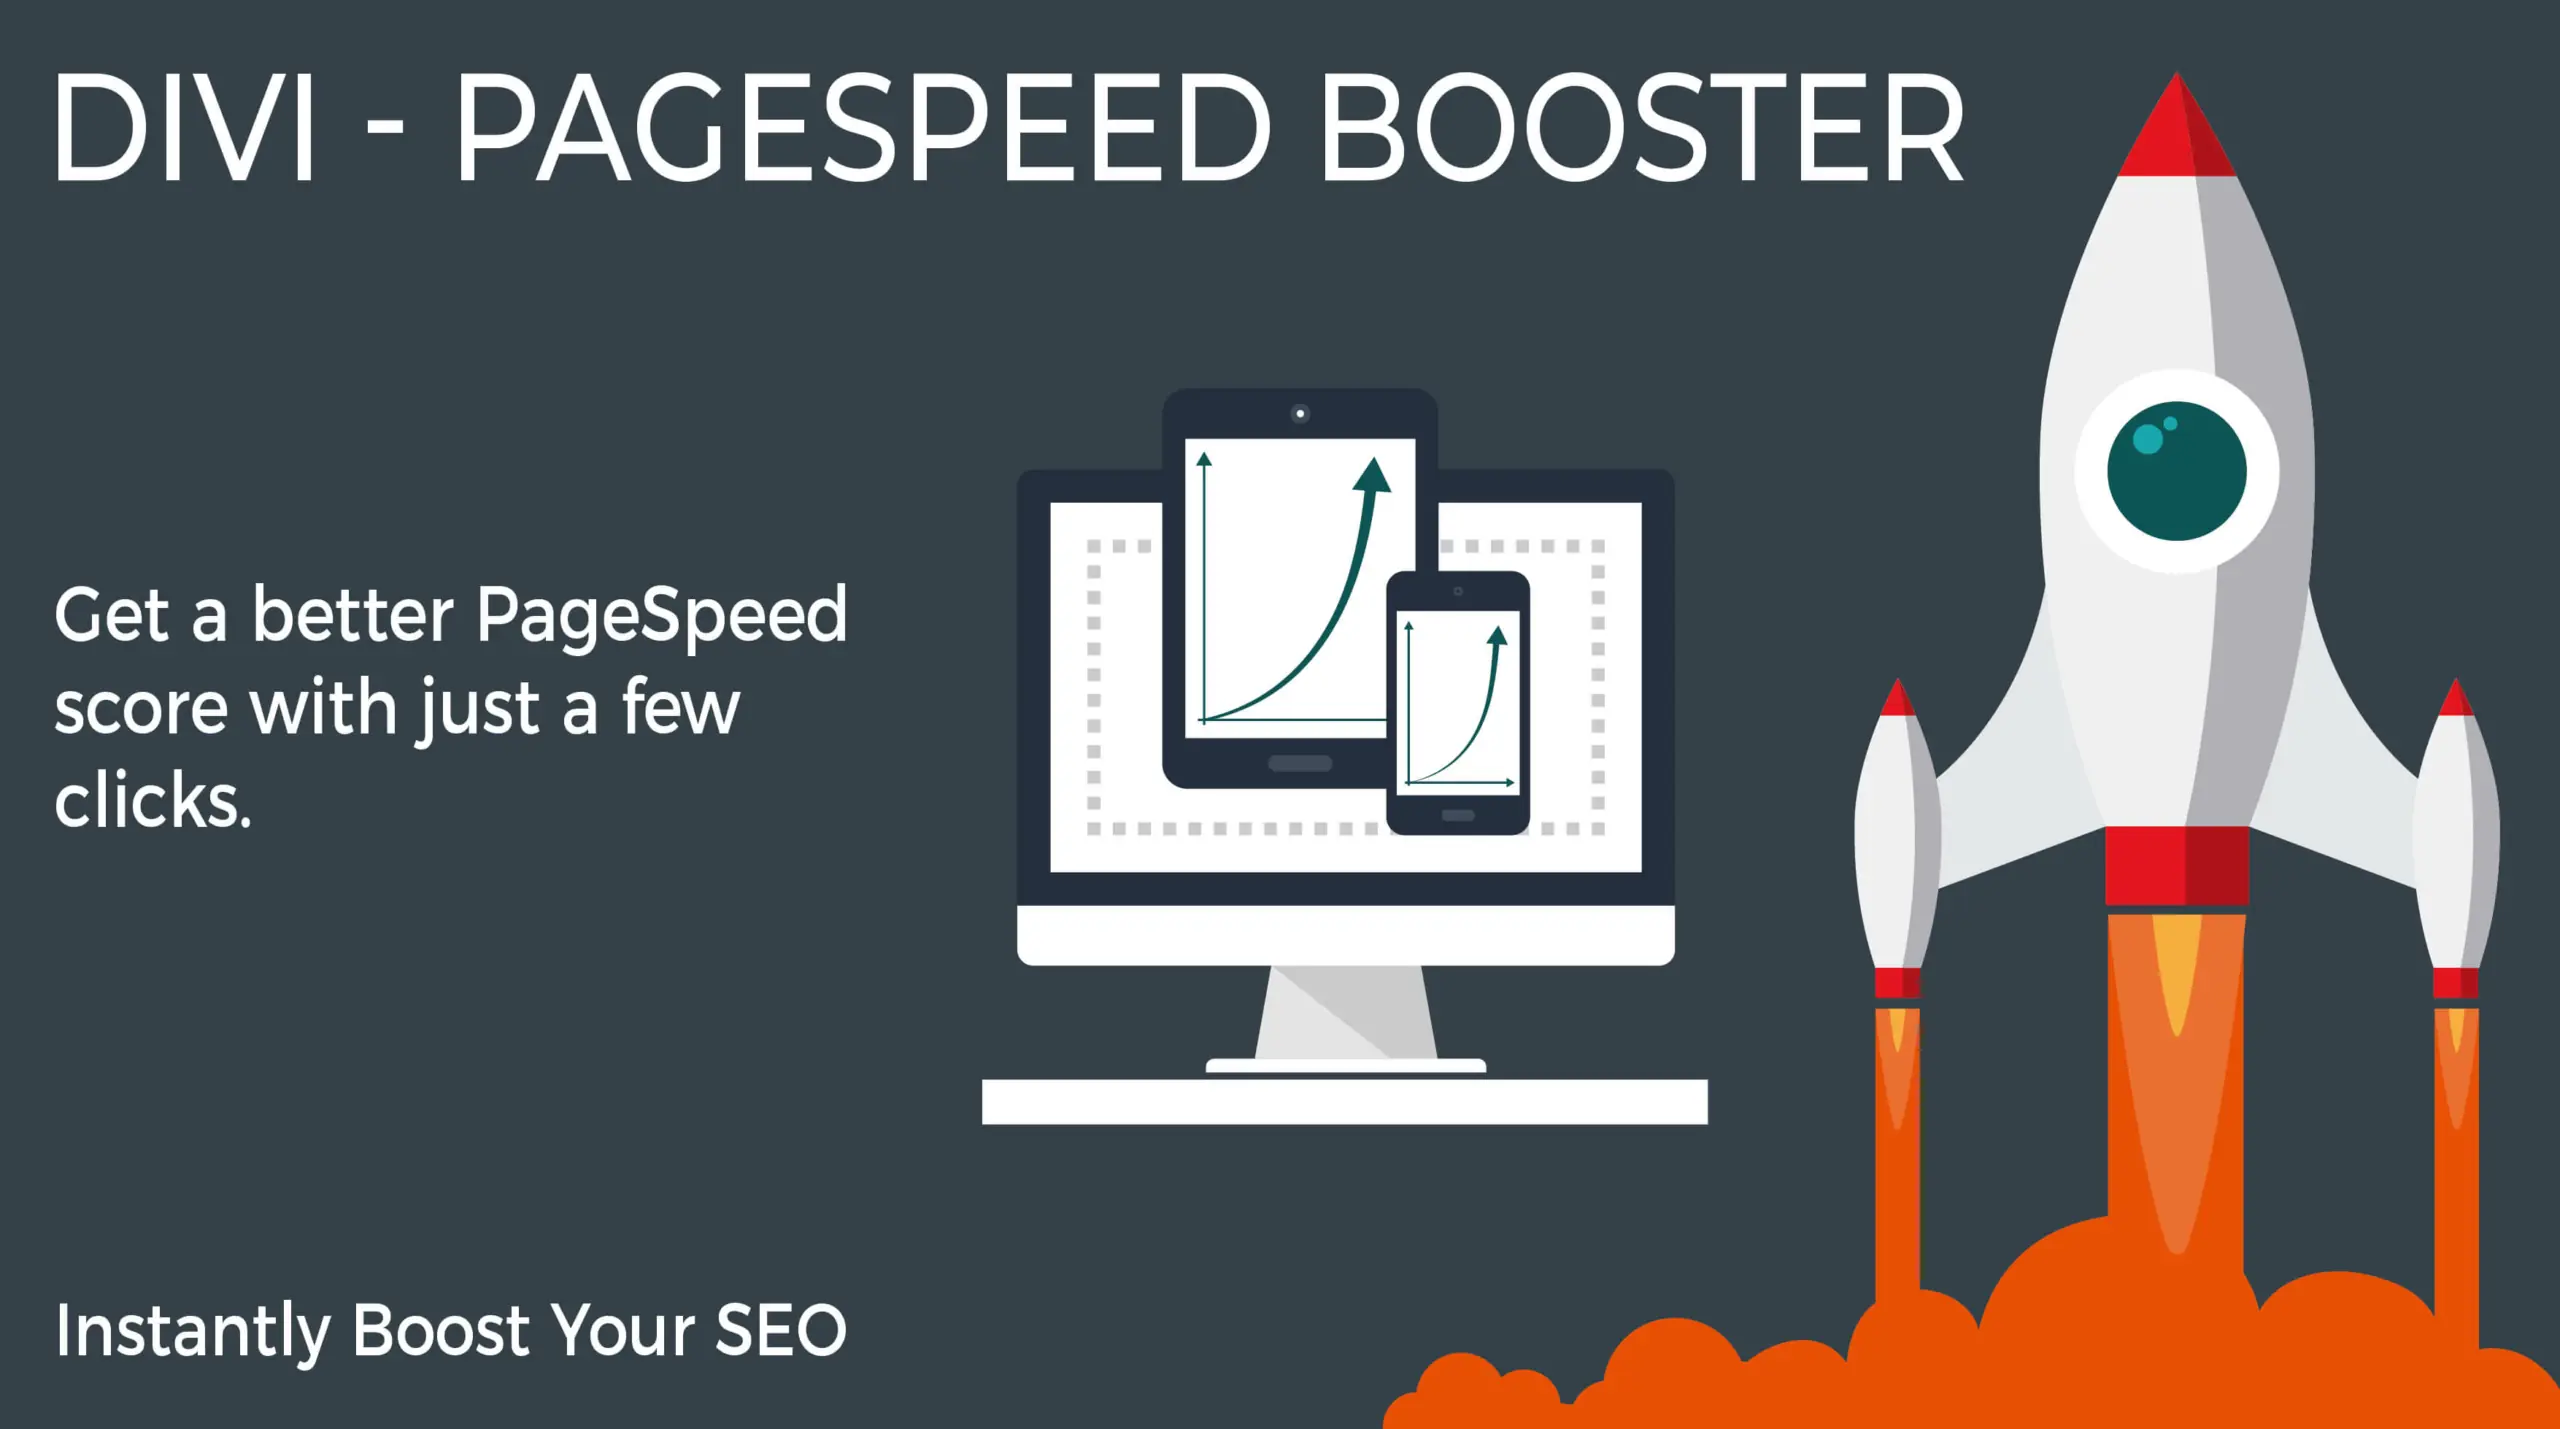 Divi - PageSpeed Booster Ad Banner